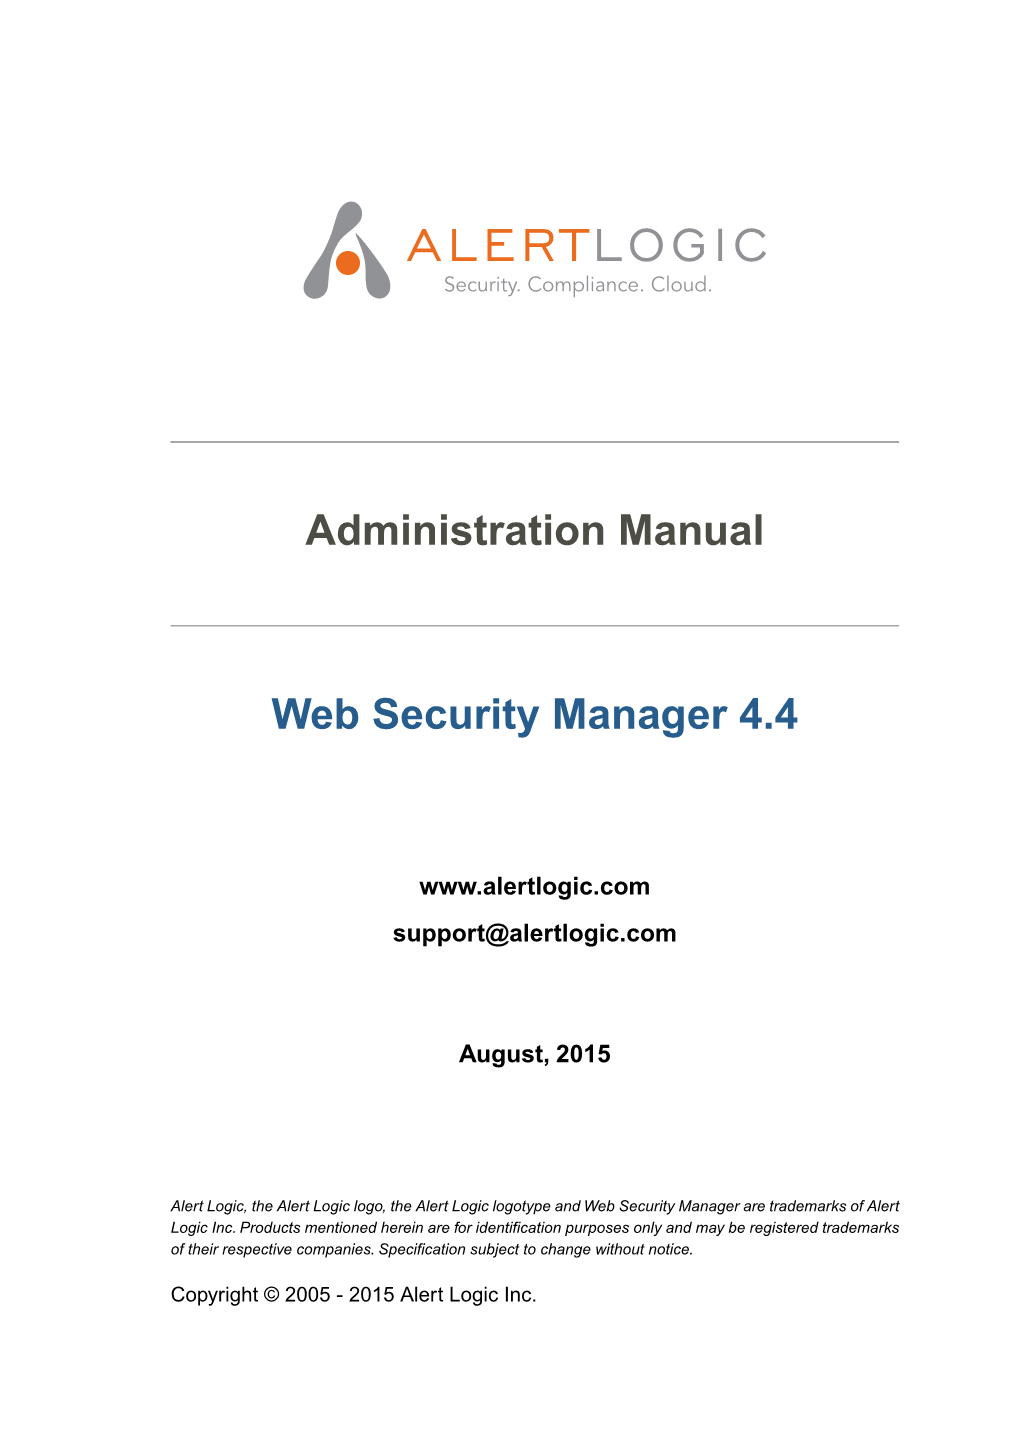 Web Security Manager Administration Manual